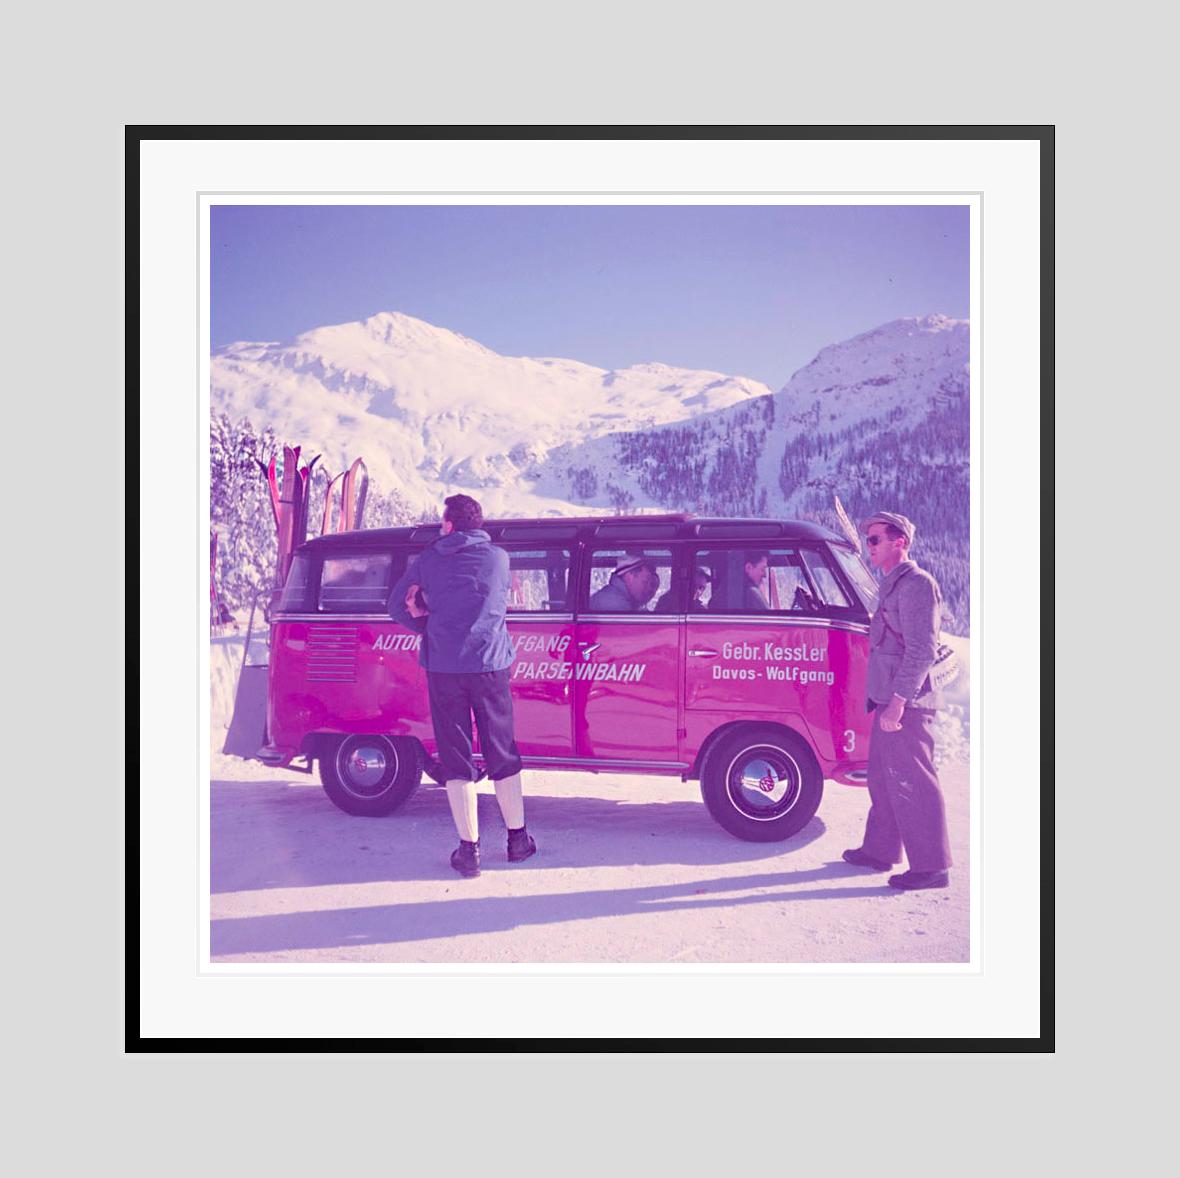  Ski Bus 1951 Oversize Limited Signature Stamped Edition  - Modern Photograph by Toni Frissell